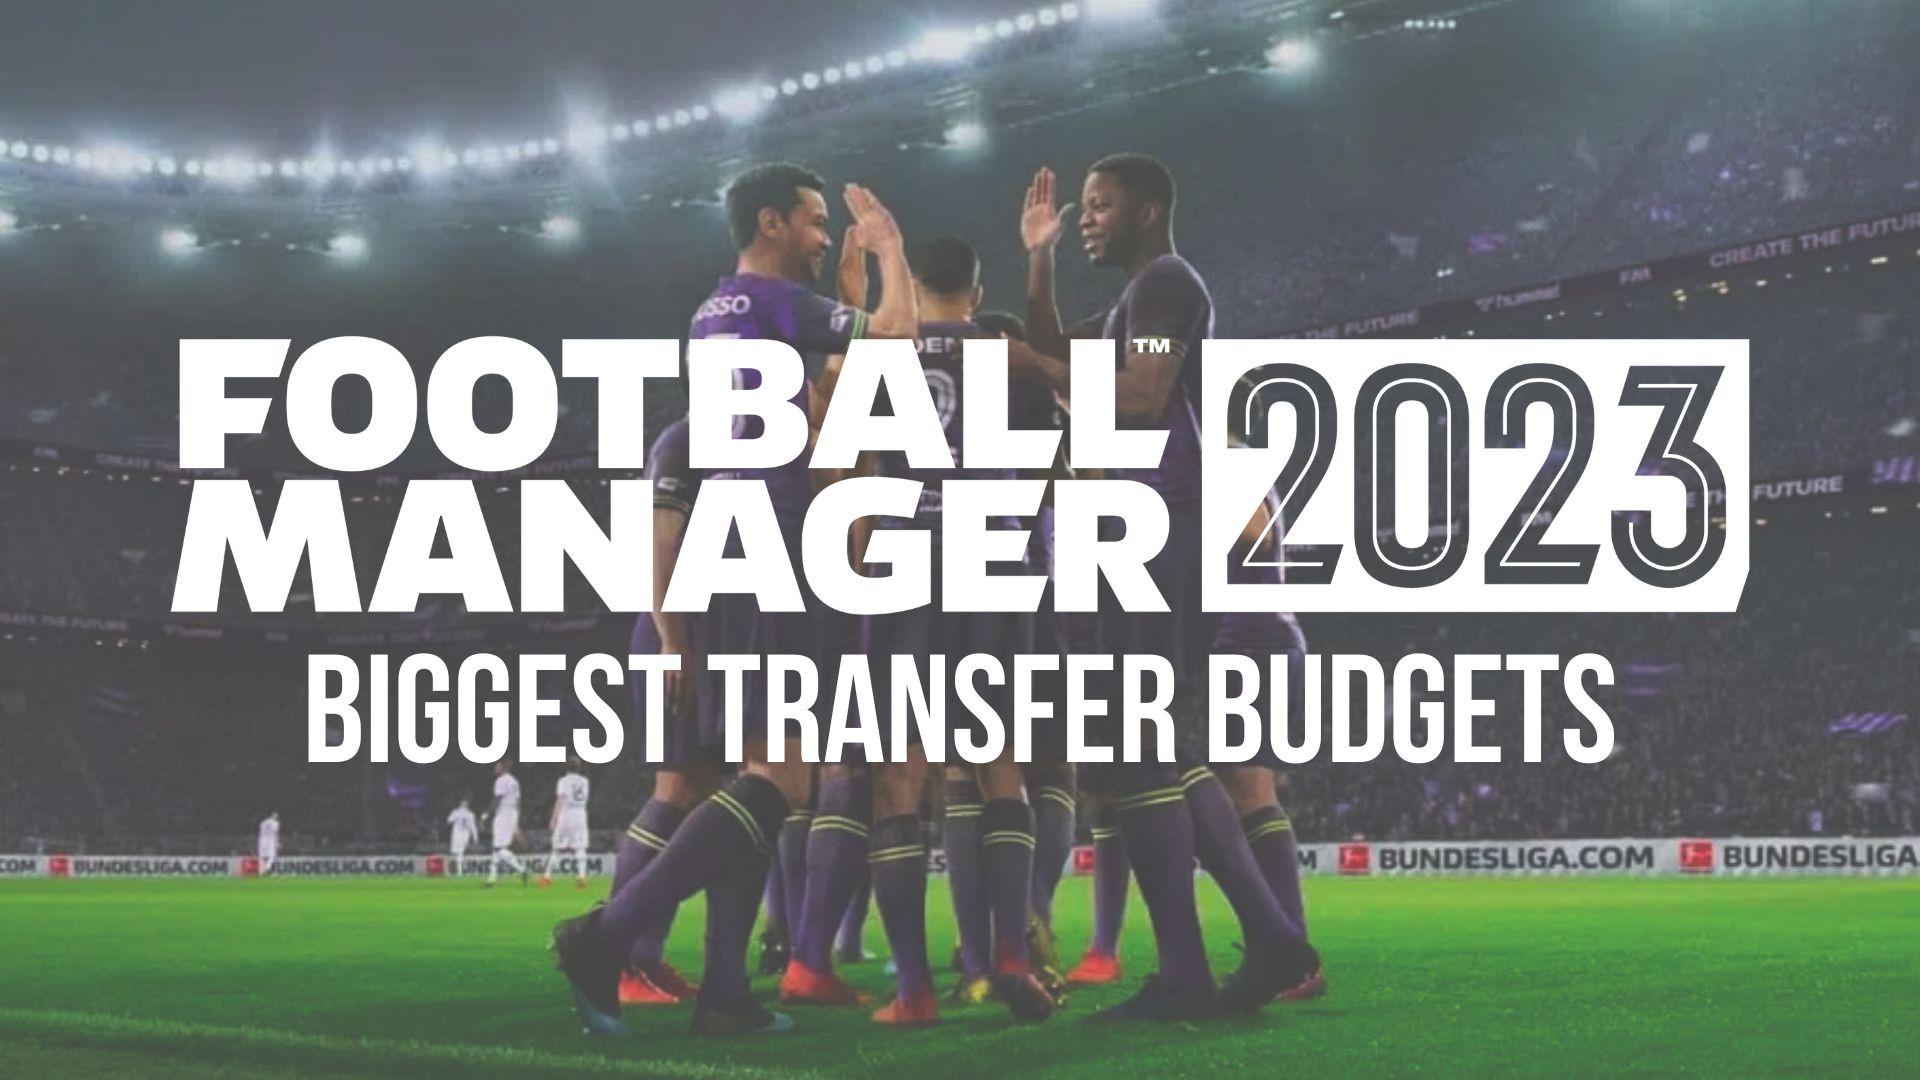 FM23 logo and biggest transfer budgets text